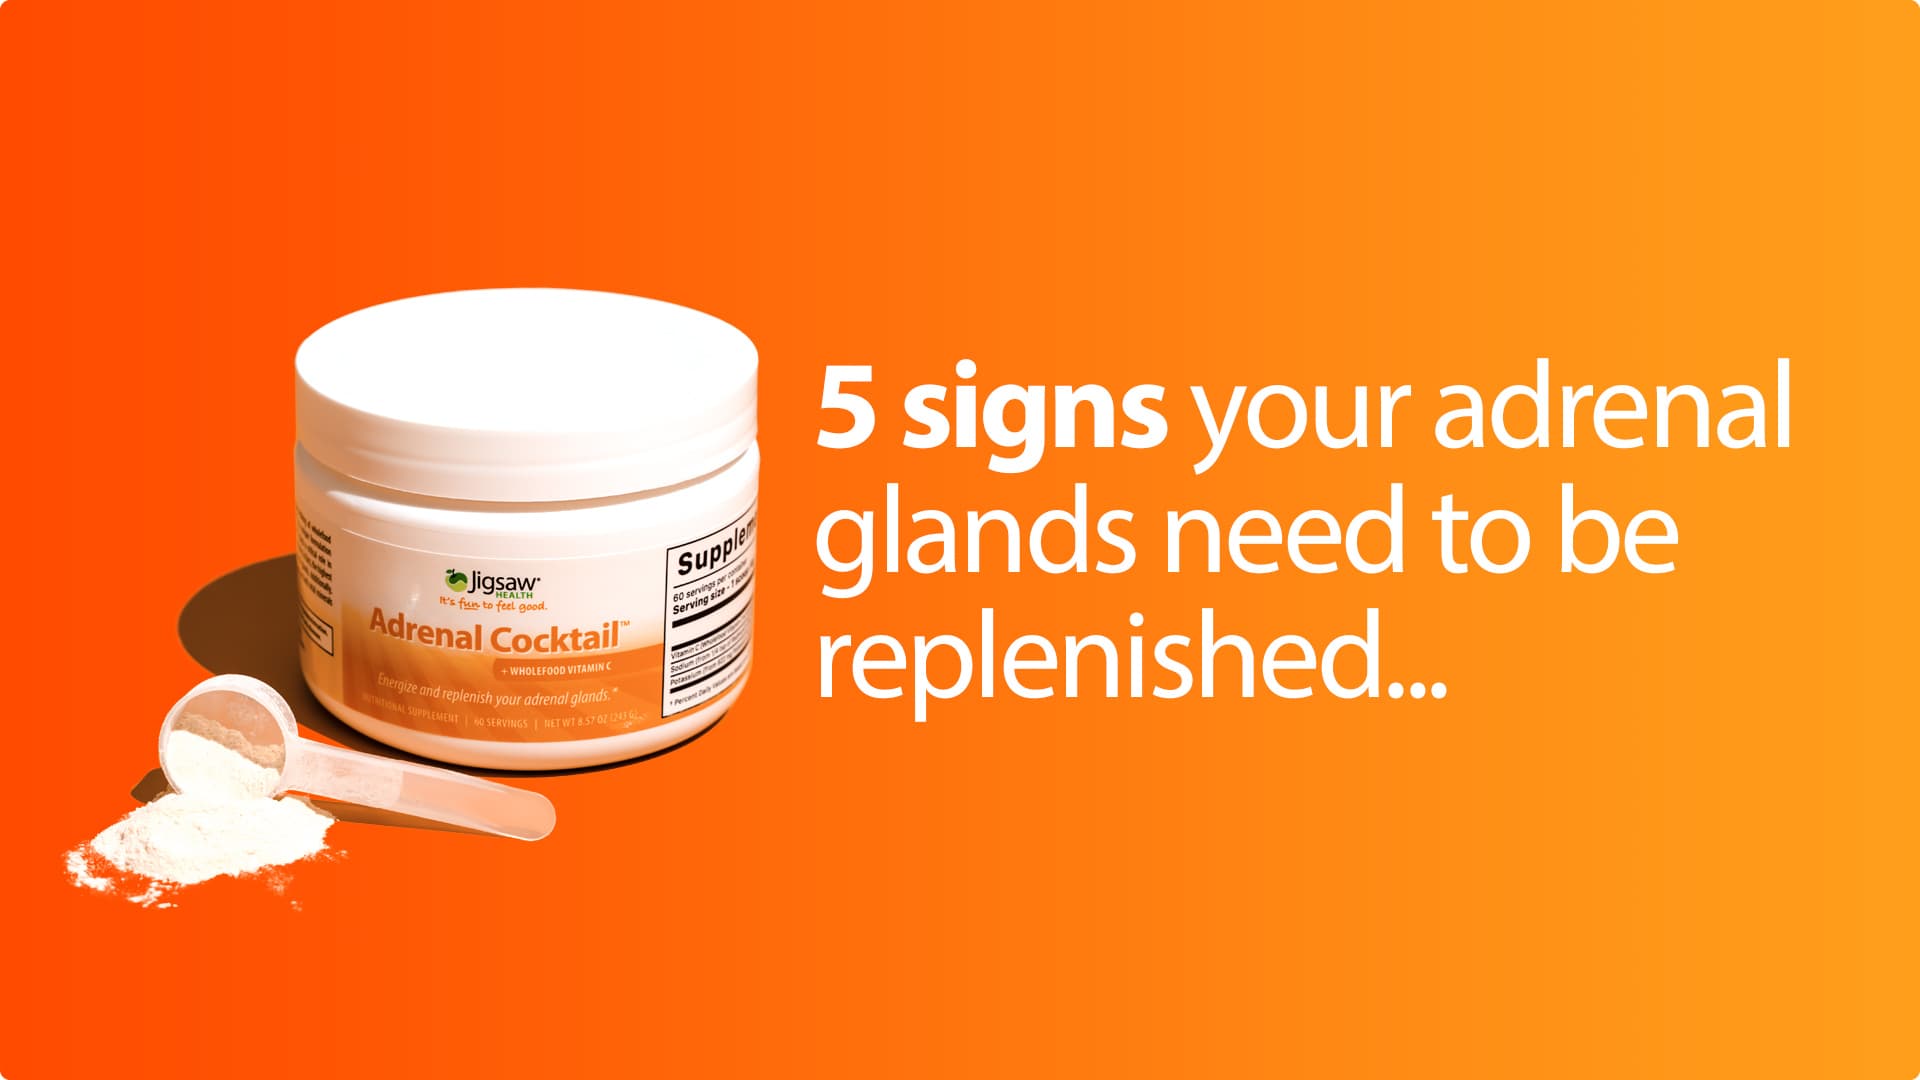 5 Signs Your Adrenal Glands Need to be Replenished...